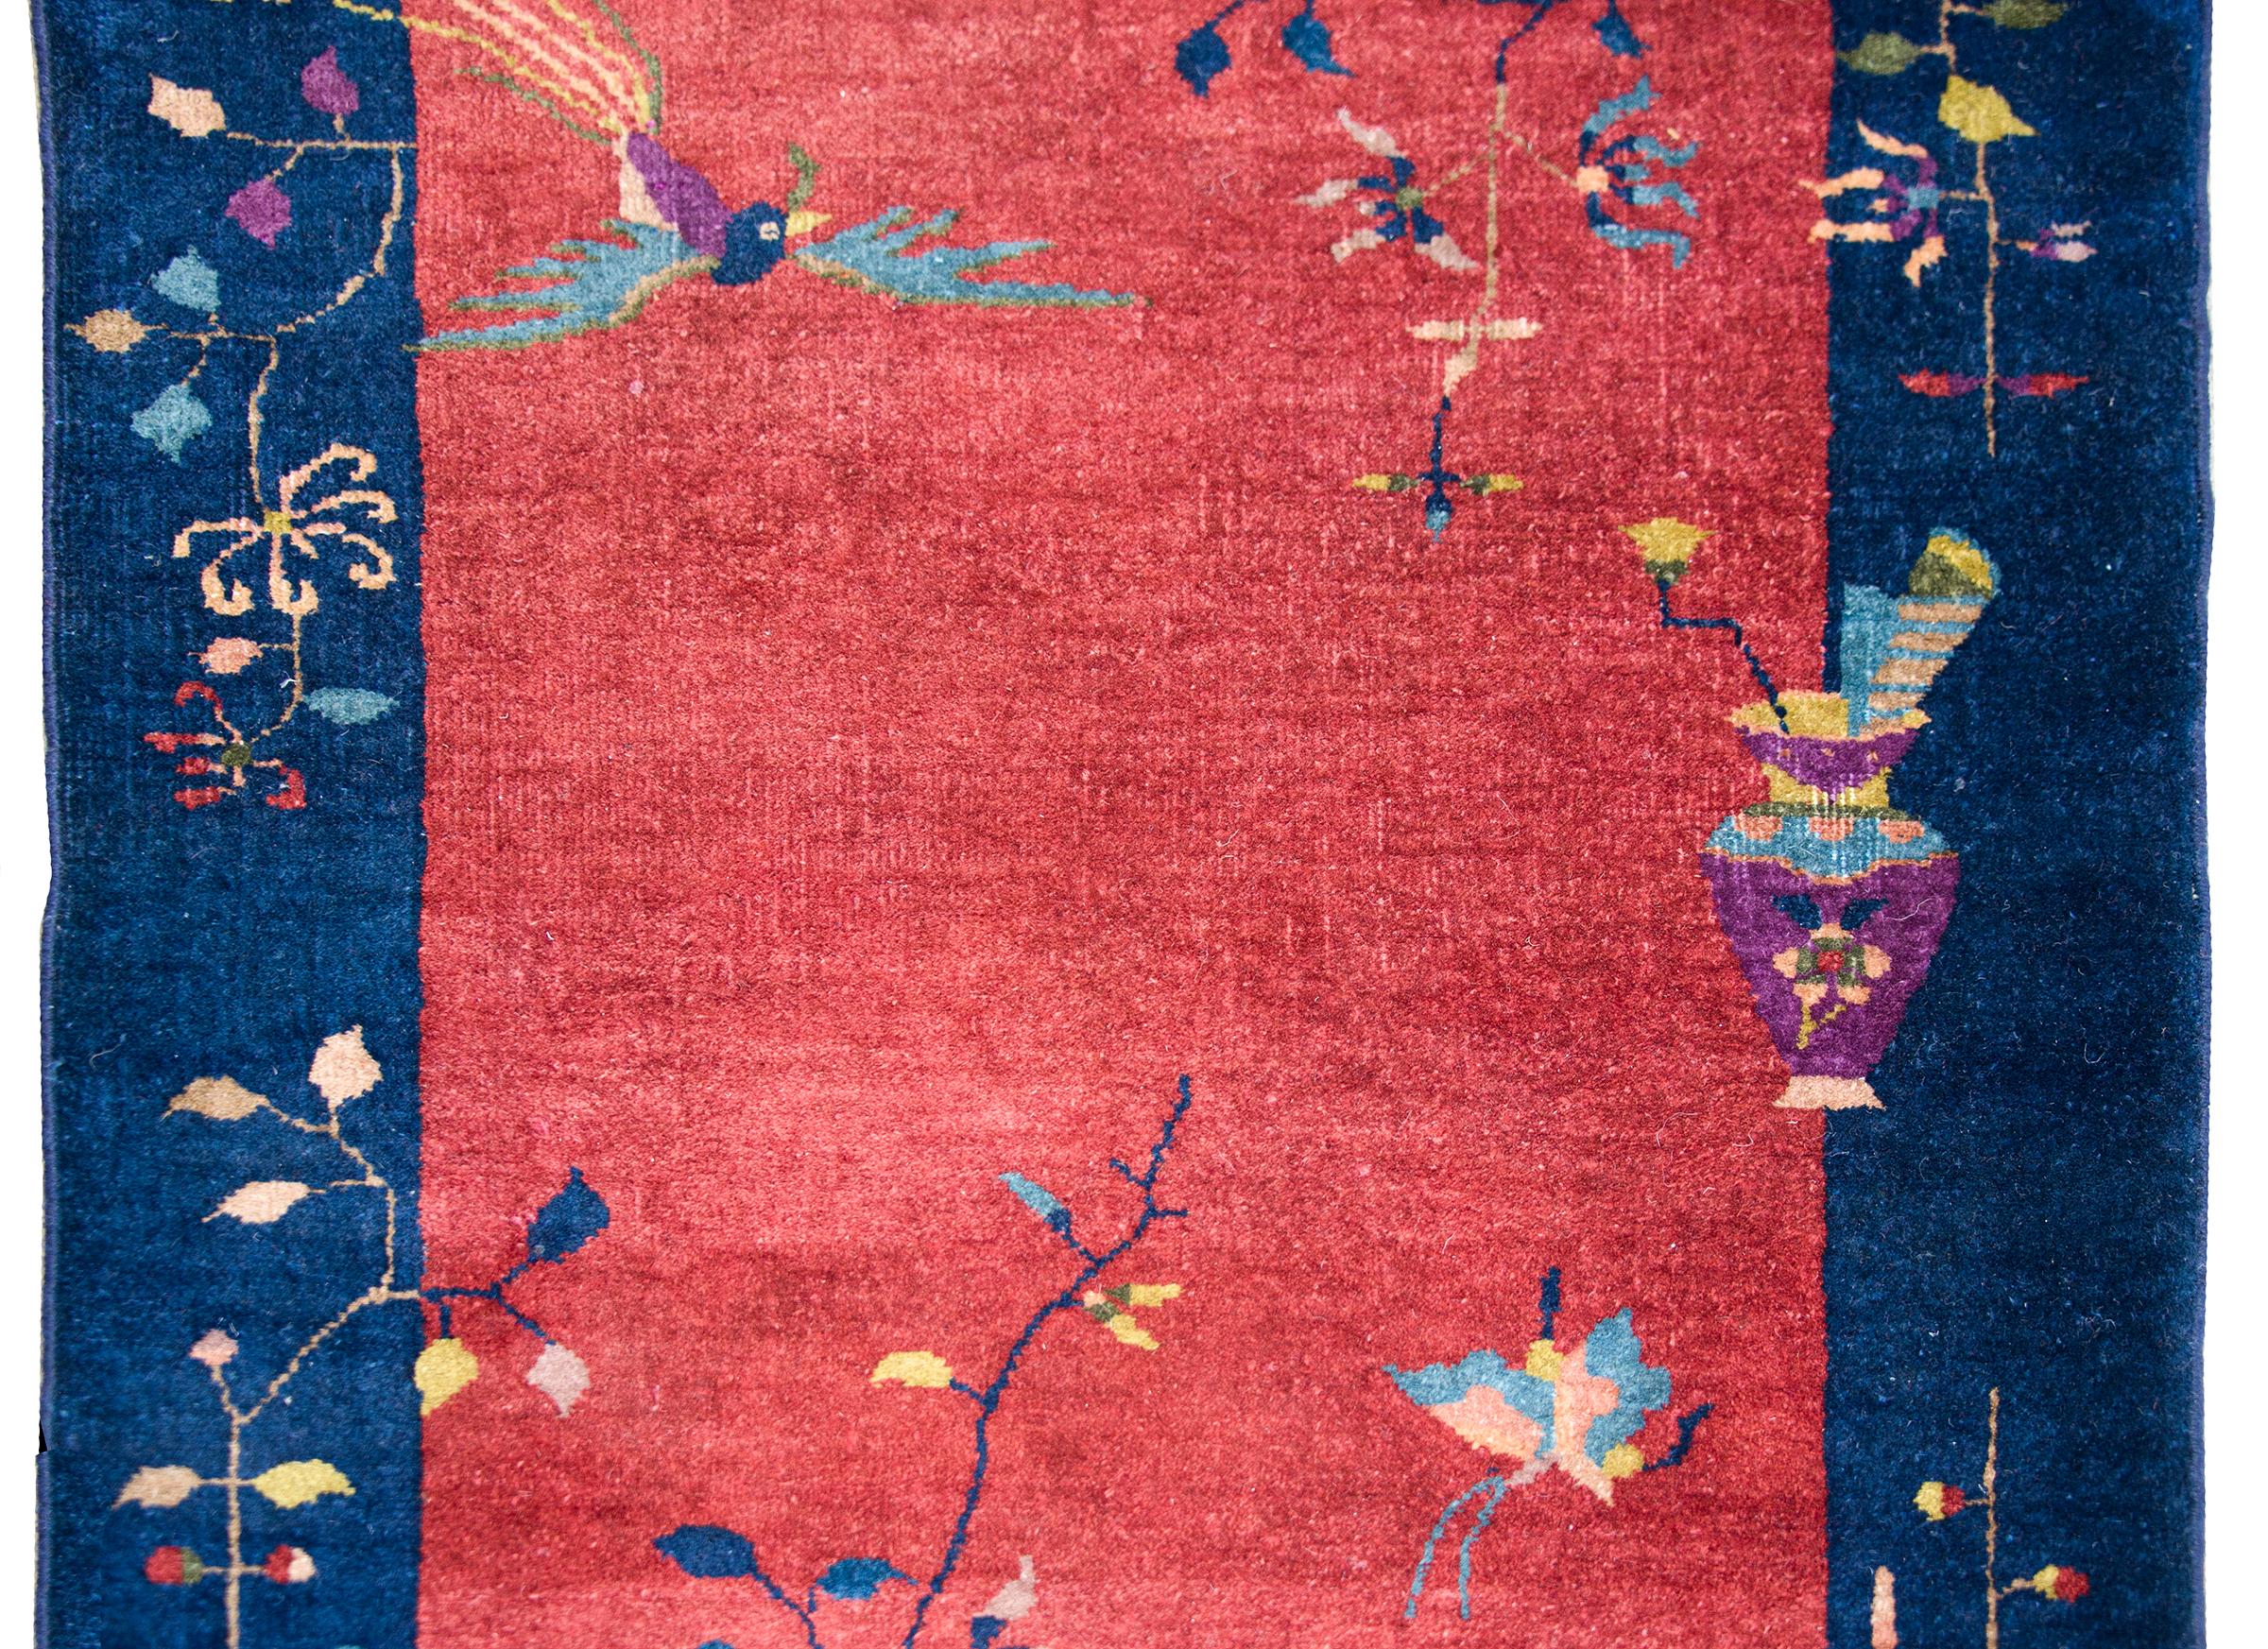 A wonderful early 20th century Chinese Art Deco rug with a cranberry field surrounded by a wide indigo border, and all overlaid with multi-colored auspicious flowers including peonies, chrysanthemum, and cherry blossoms, with with a scholar's vase,